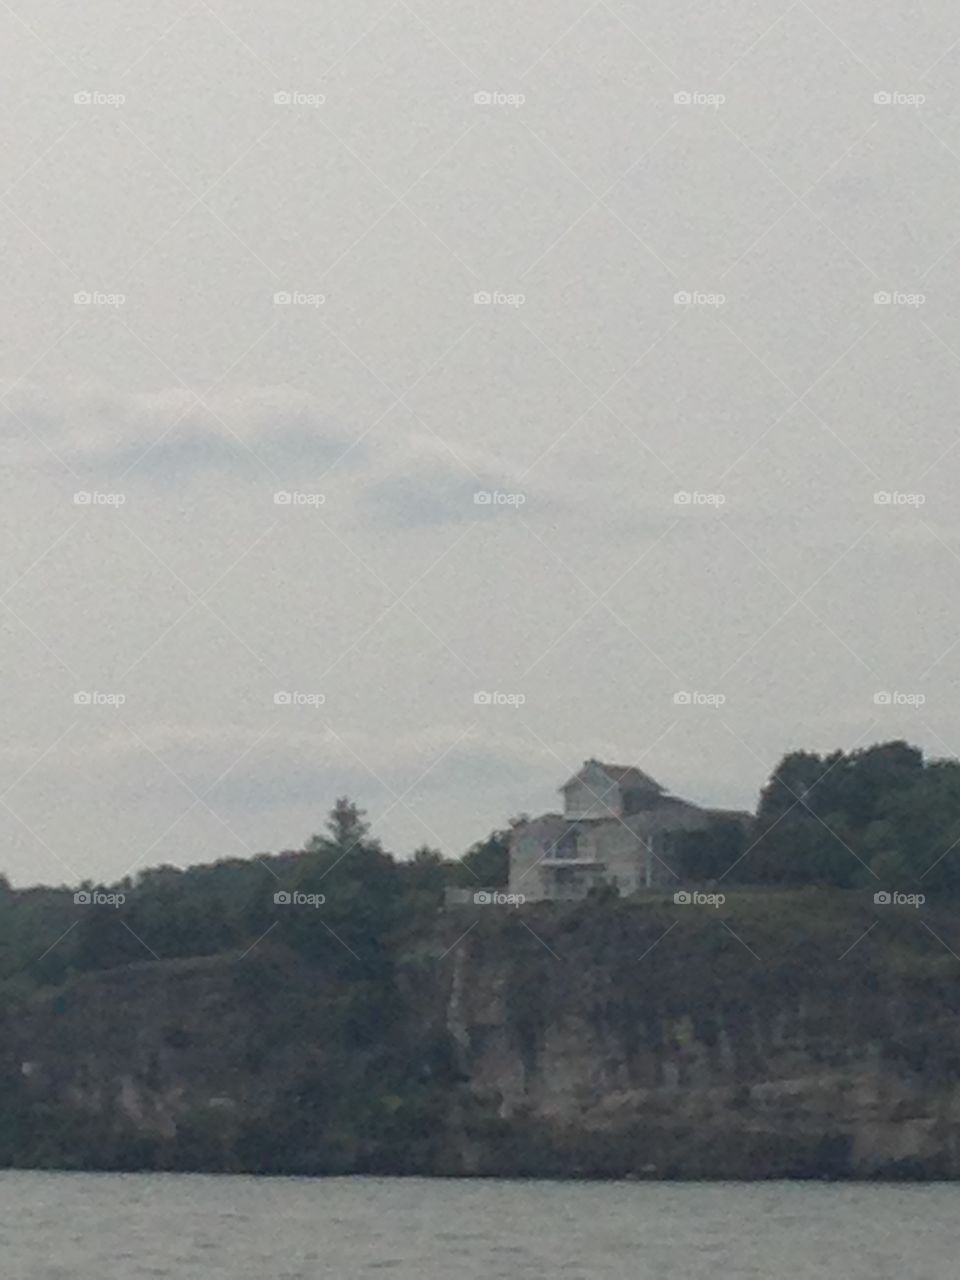 Mountain top house in Lake of the Ozarks